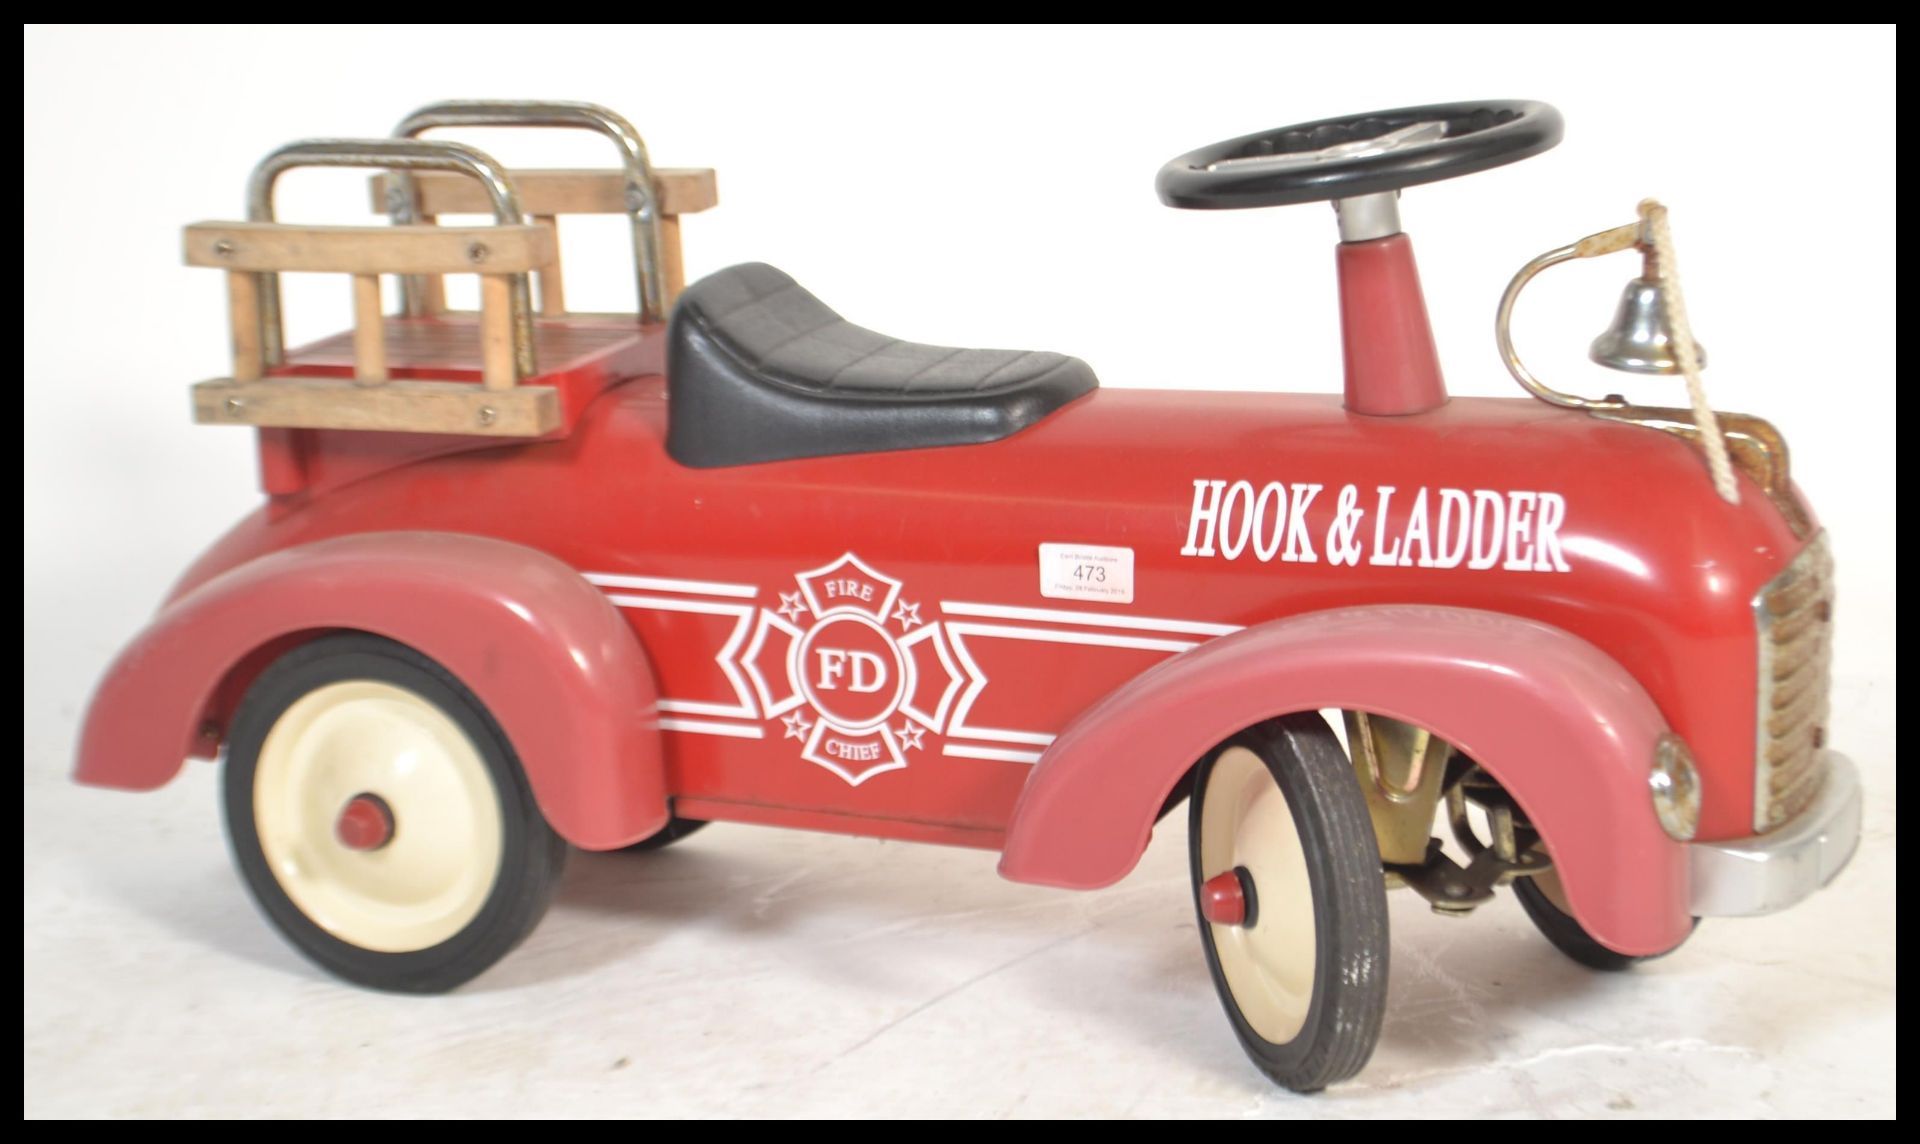 A children's fire ride along truck toy in the form of a fire truck reading 'Hook and Ladder' of